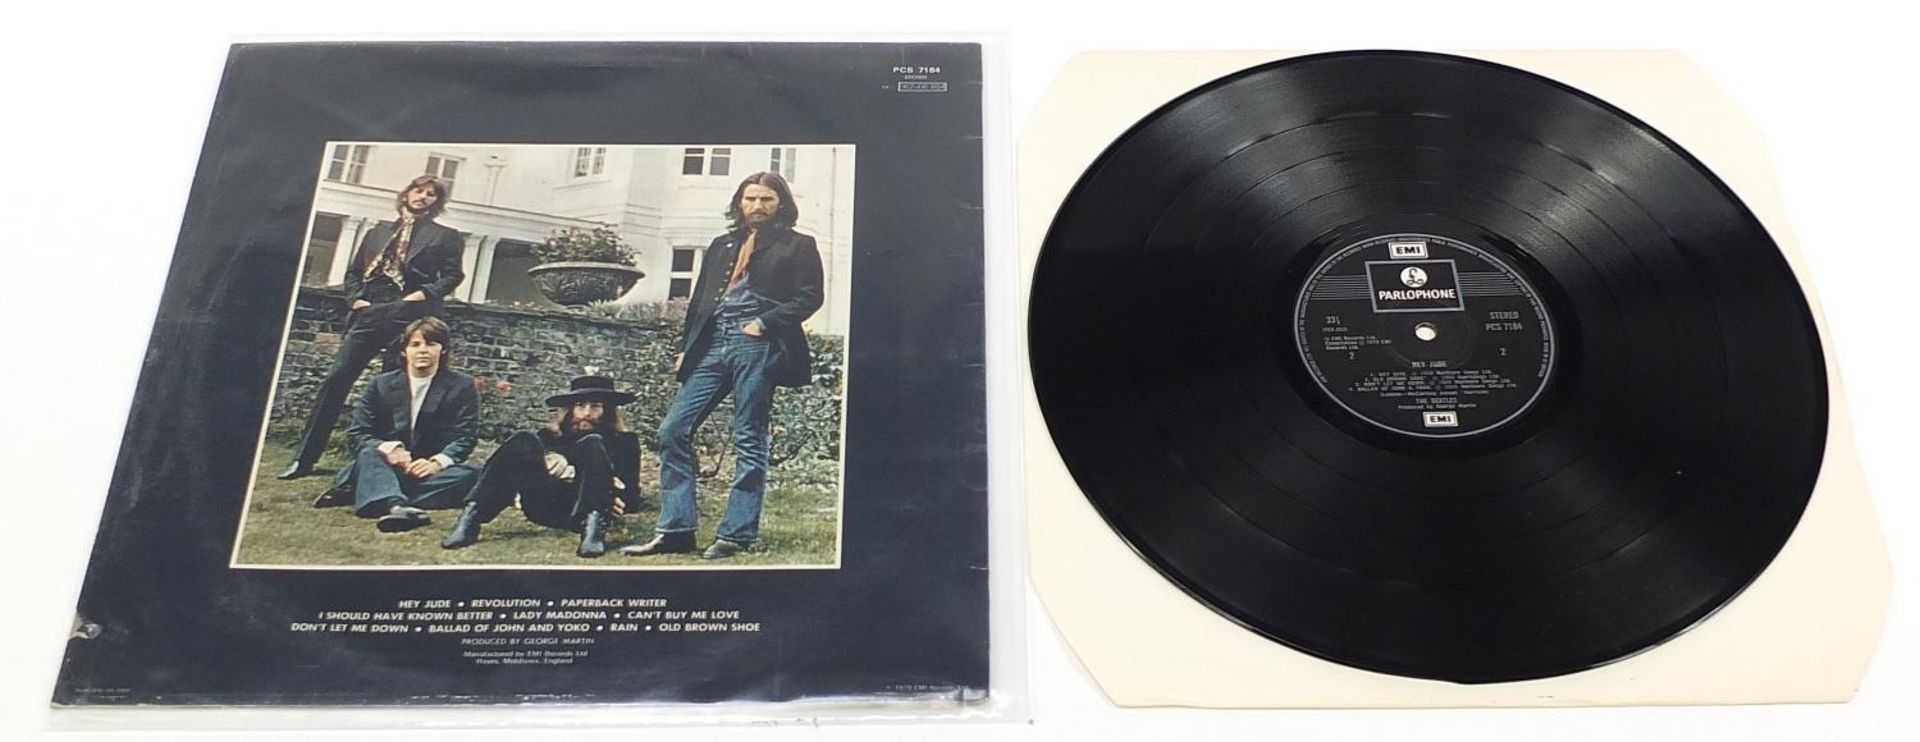 The Beatles, John Lennon & Yoko Ono vinyl LP records including Walls and Bridges with poster, - Image 17 of 41